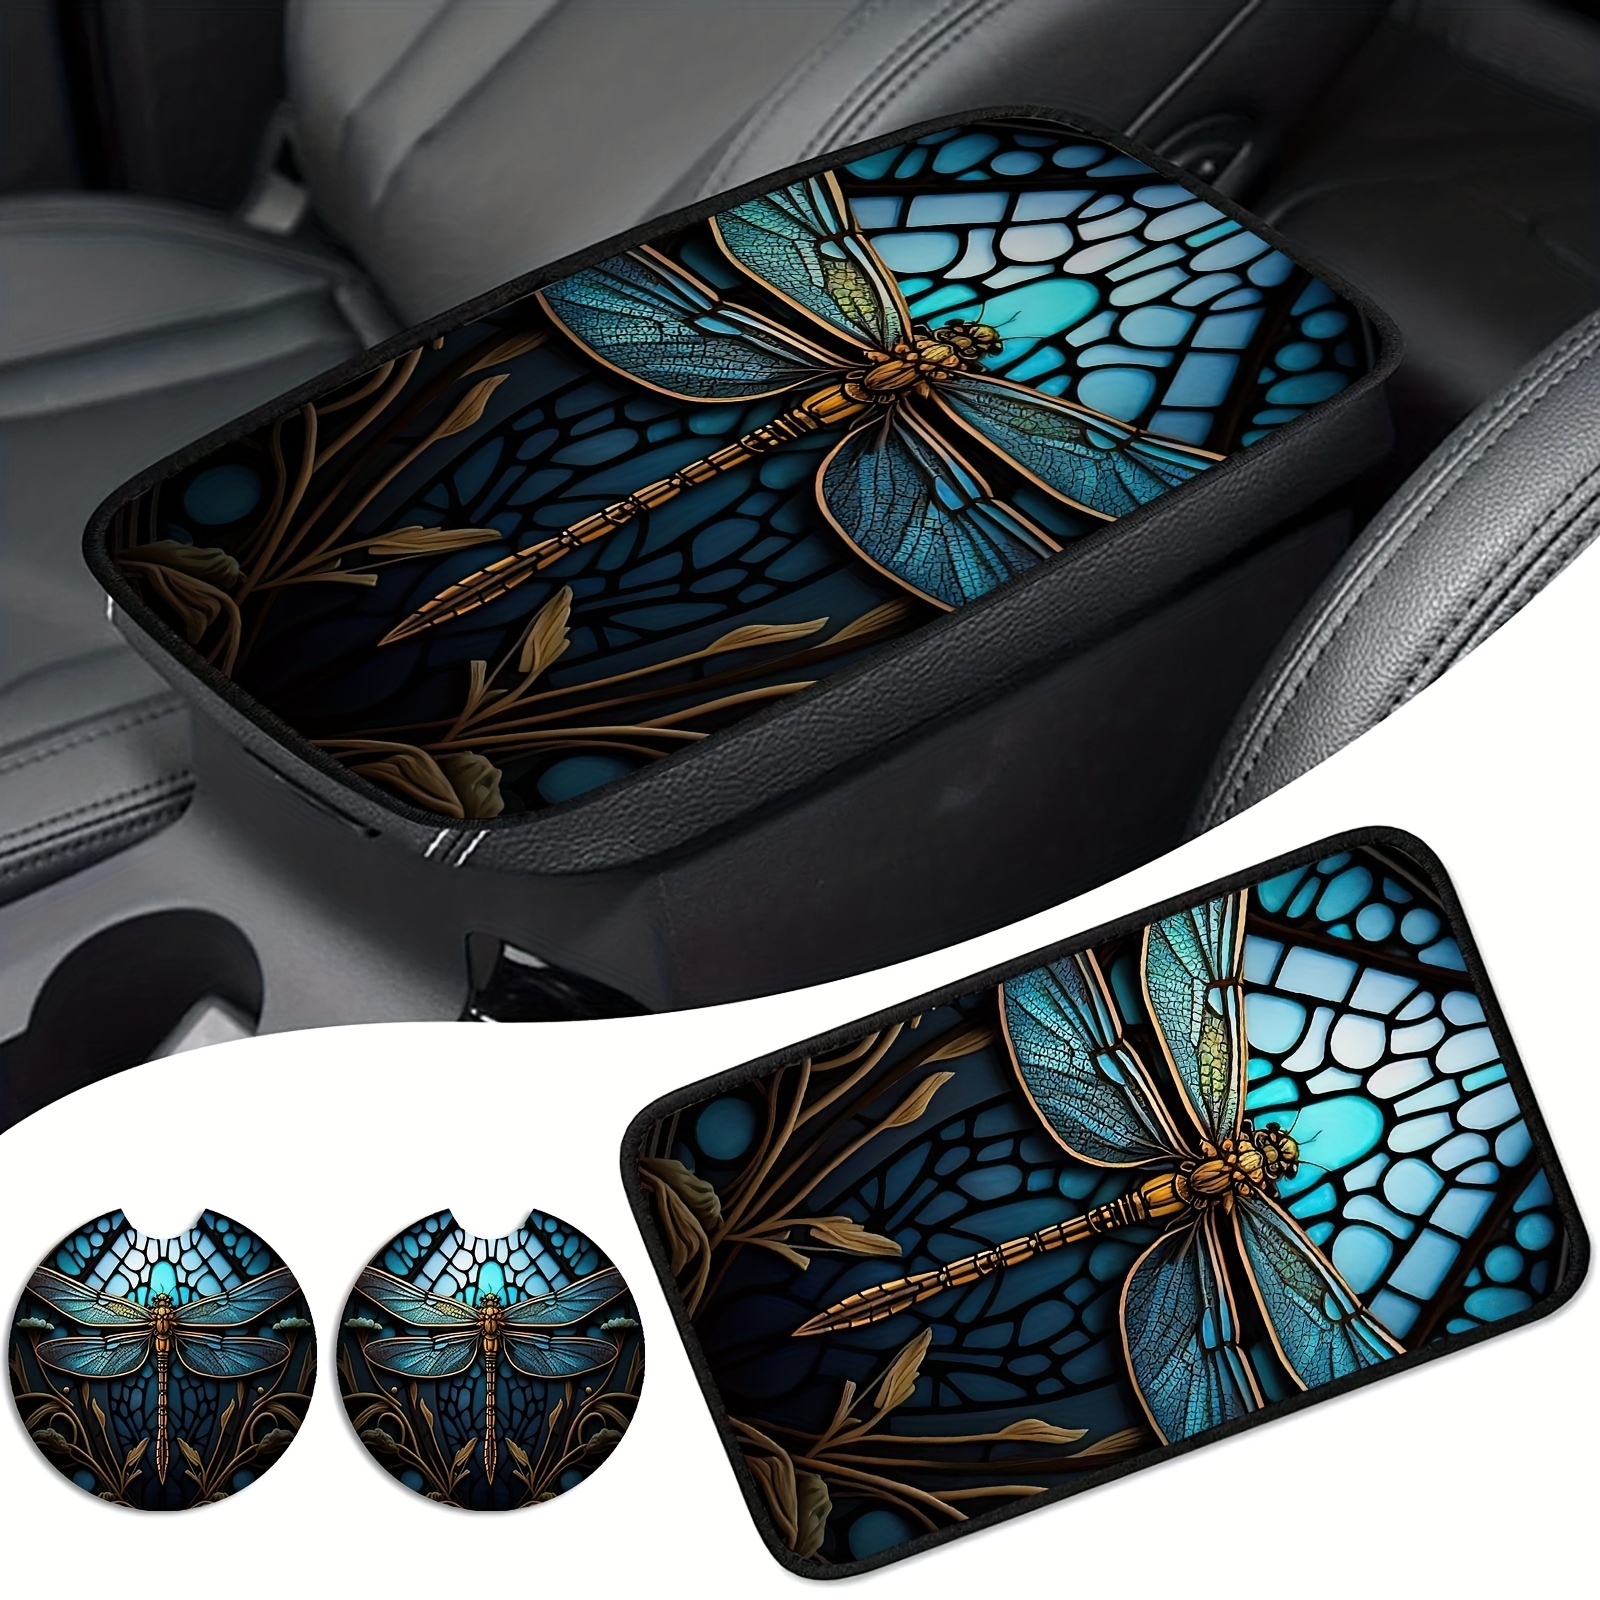 

Cool Dragonfly Auto Center Console Cover, Universal Arm Rest Cover For Car With 2 Pc Car Coaster, Armrest Cover, Car Armrest Cover For Most Car